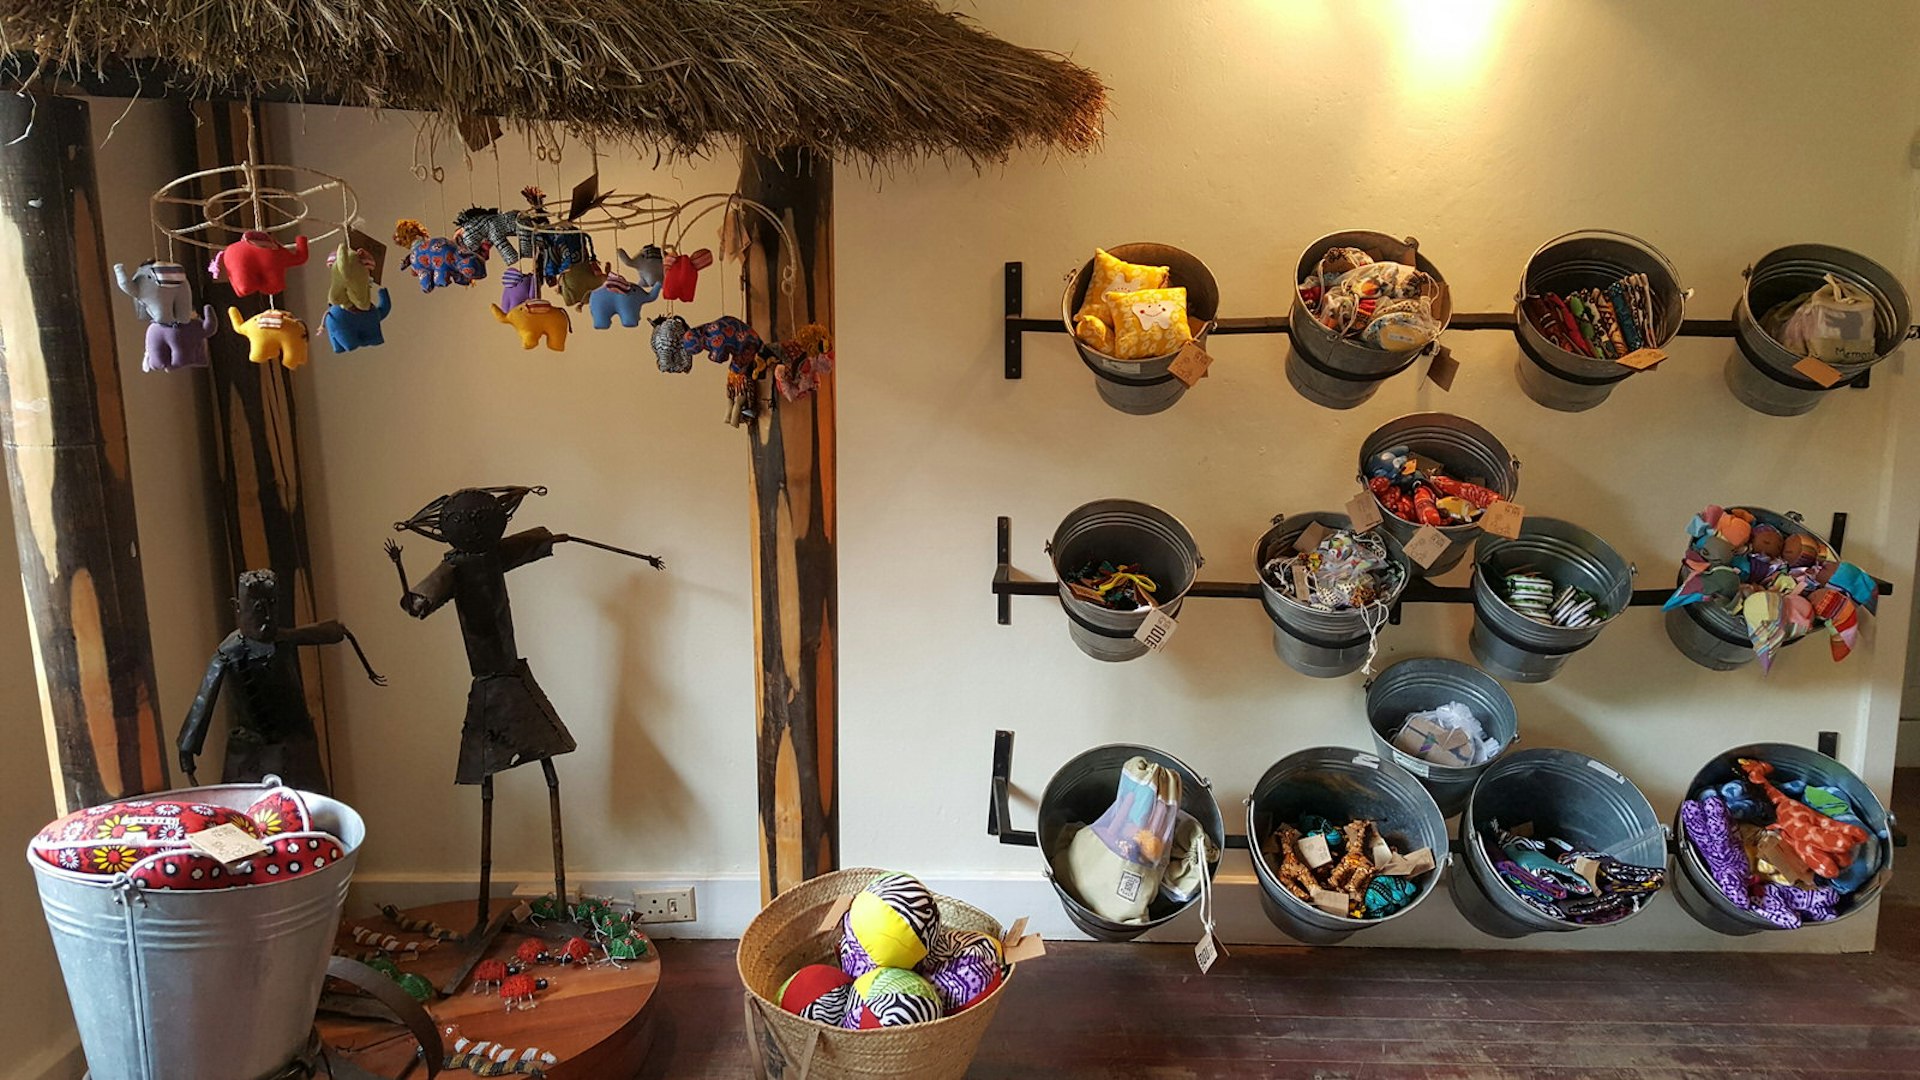 An image of the store interior, with a neat rows of large tin buckets hung on the wall, each holding colourful children's toys made of brightly-coloured fabric. In the corner, beneath a thatched gazebo of sorts, hang lovely mobiles of little fabric elephants. Below them are little tin statues of people made from old cans. Pefect Nairobi shopping for kids at home © Clementine Logan / Lonely Planet